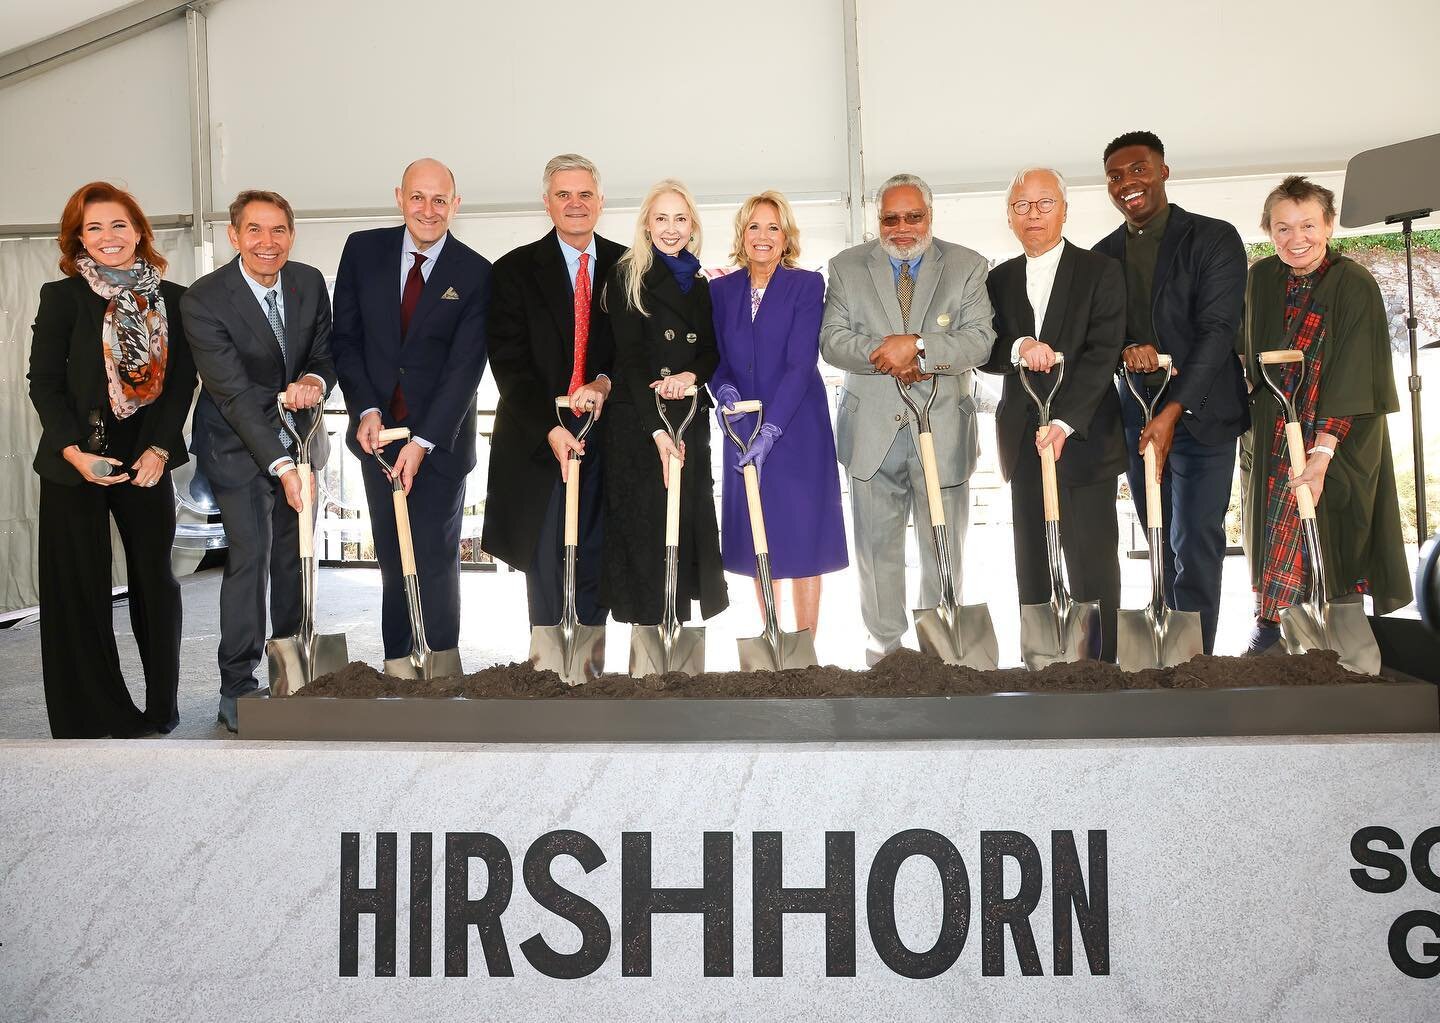 Yesterday was an historic moment for the @hirshhorn, marking the groundbreaking for a new design for a 21st century sculpture garden by artist/architect Hiroshi Sugimoto. There to mark the occasion (from right to left) Laurie Anderson, Adam Pendleton